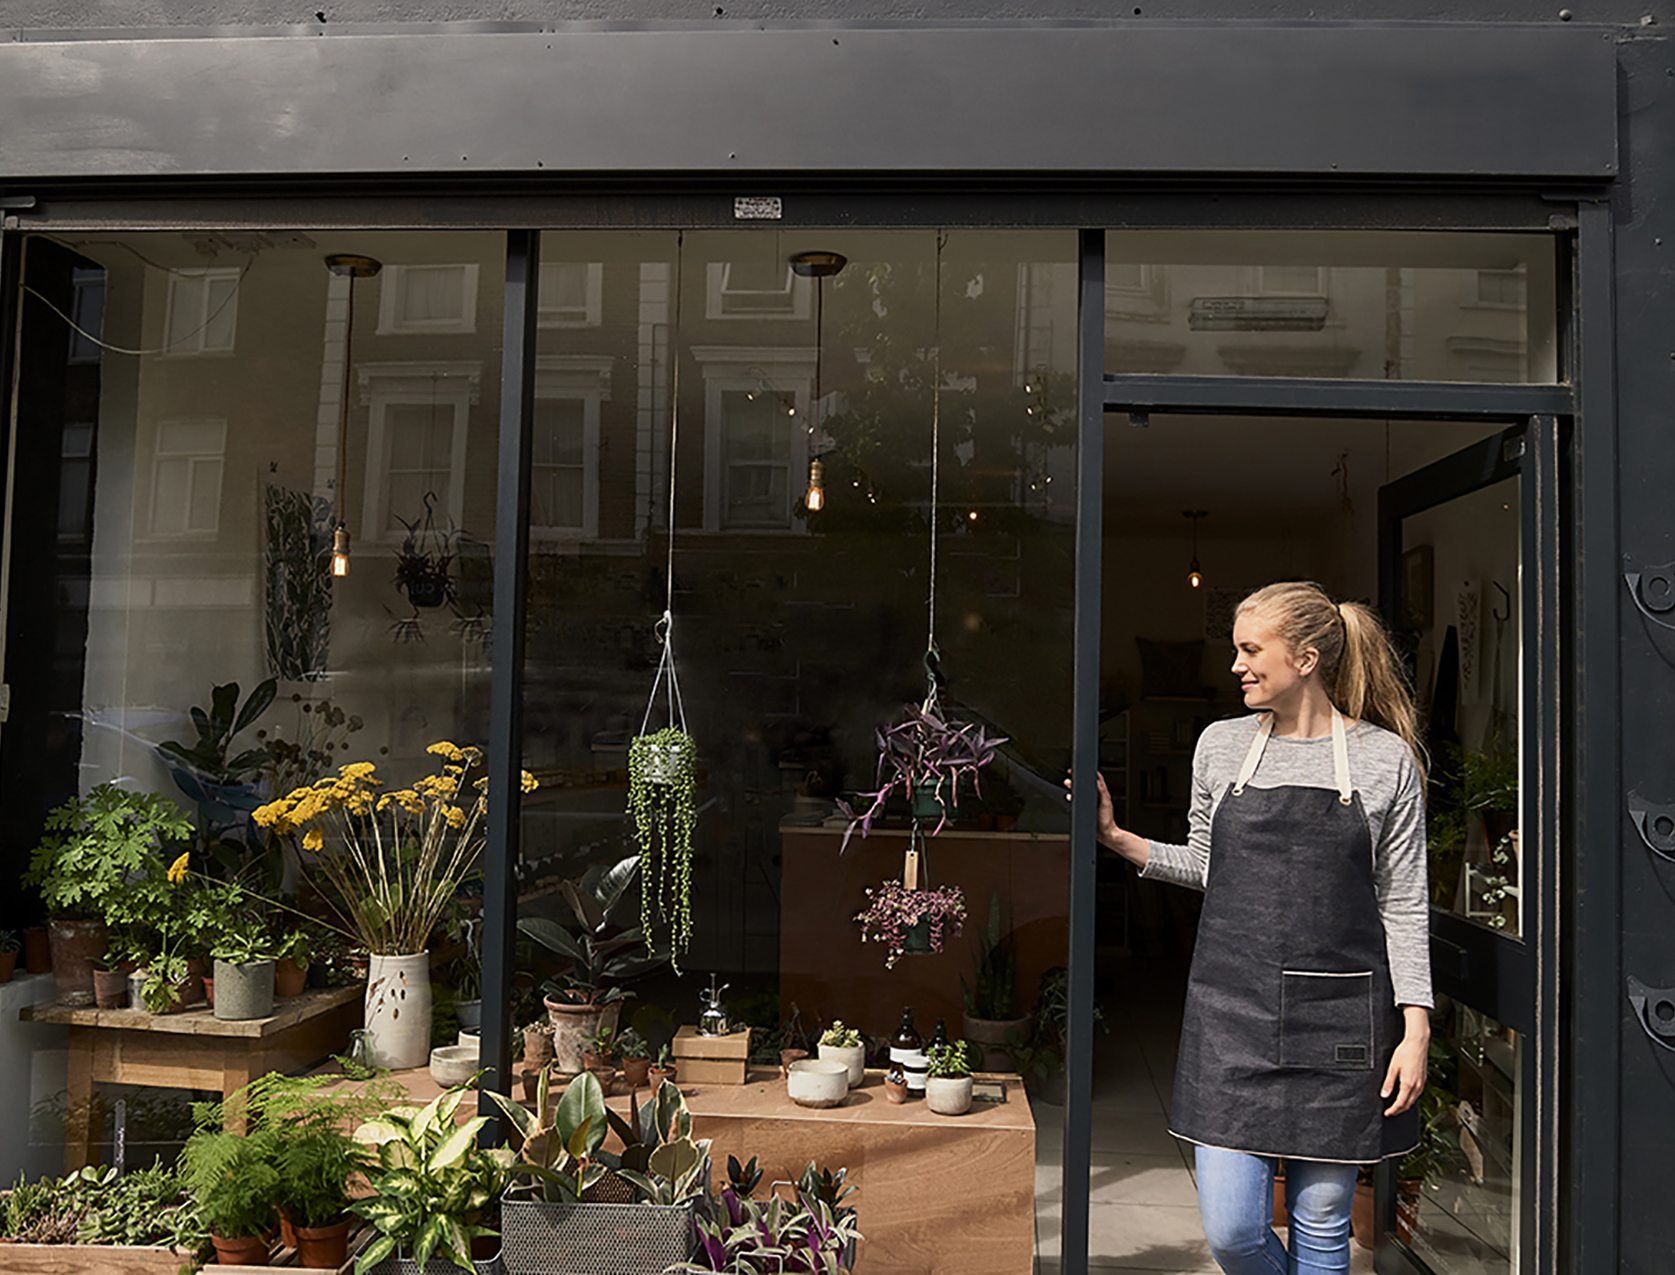 Pop-up shops: How opening one could help your business